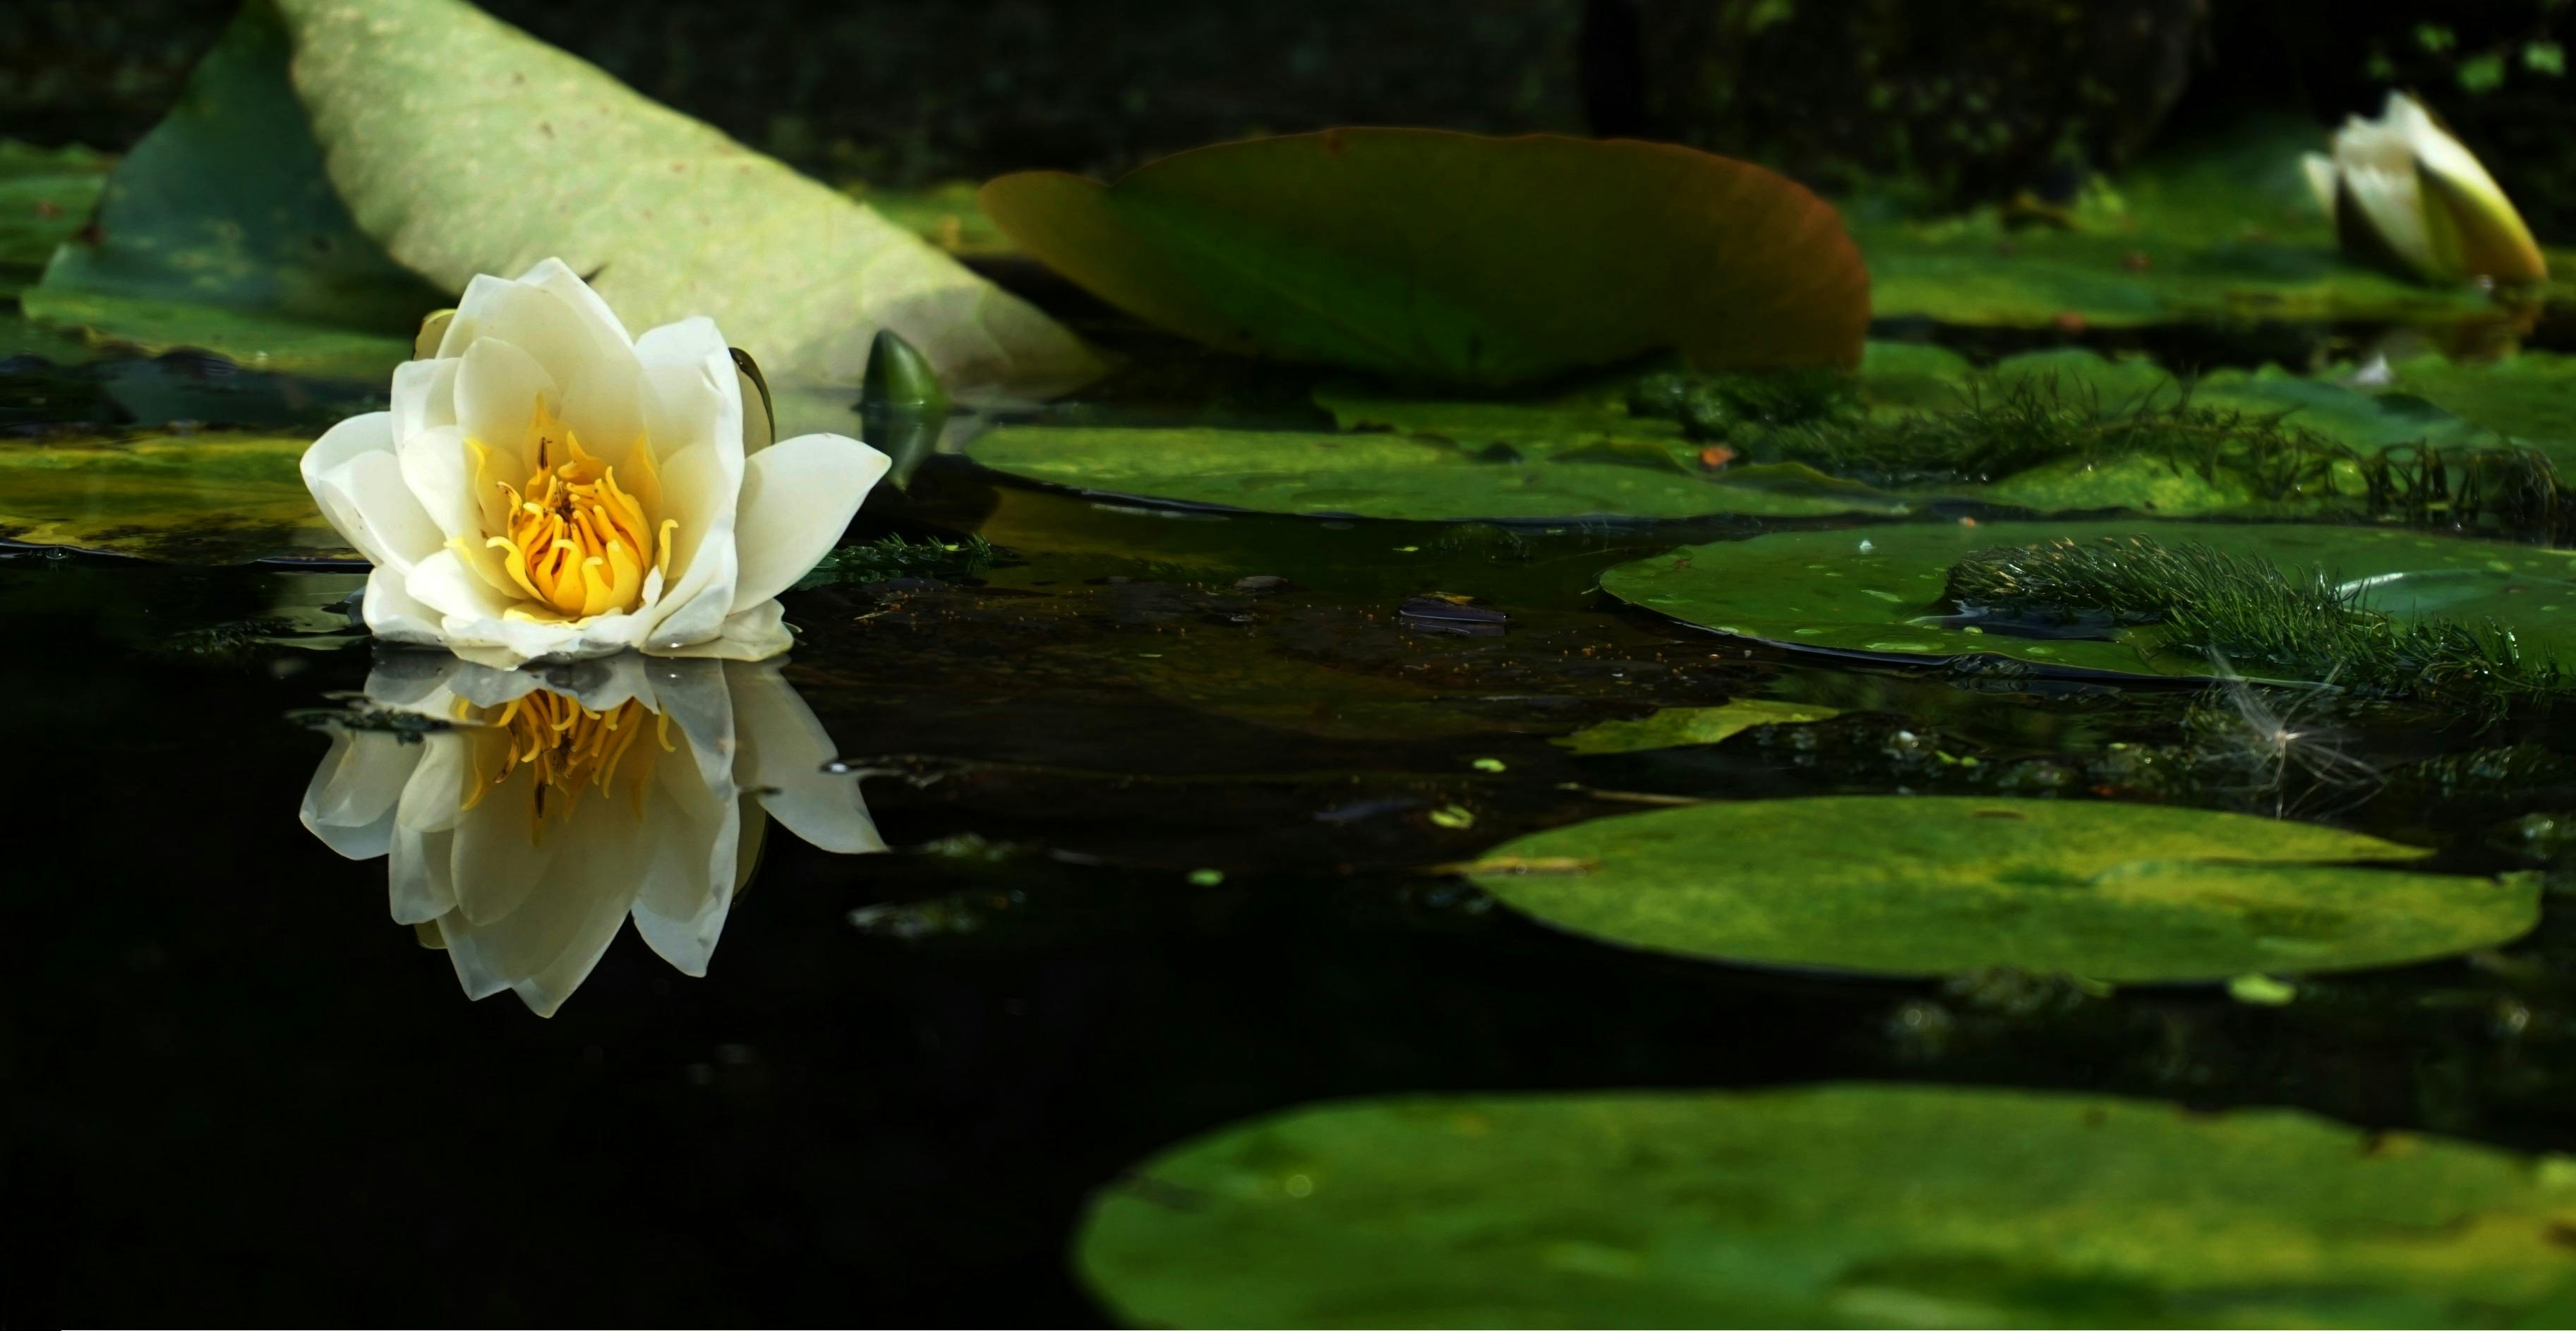 Small pond with flowerswallpaper1920x1080 wallpaper  1920x1080 